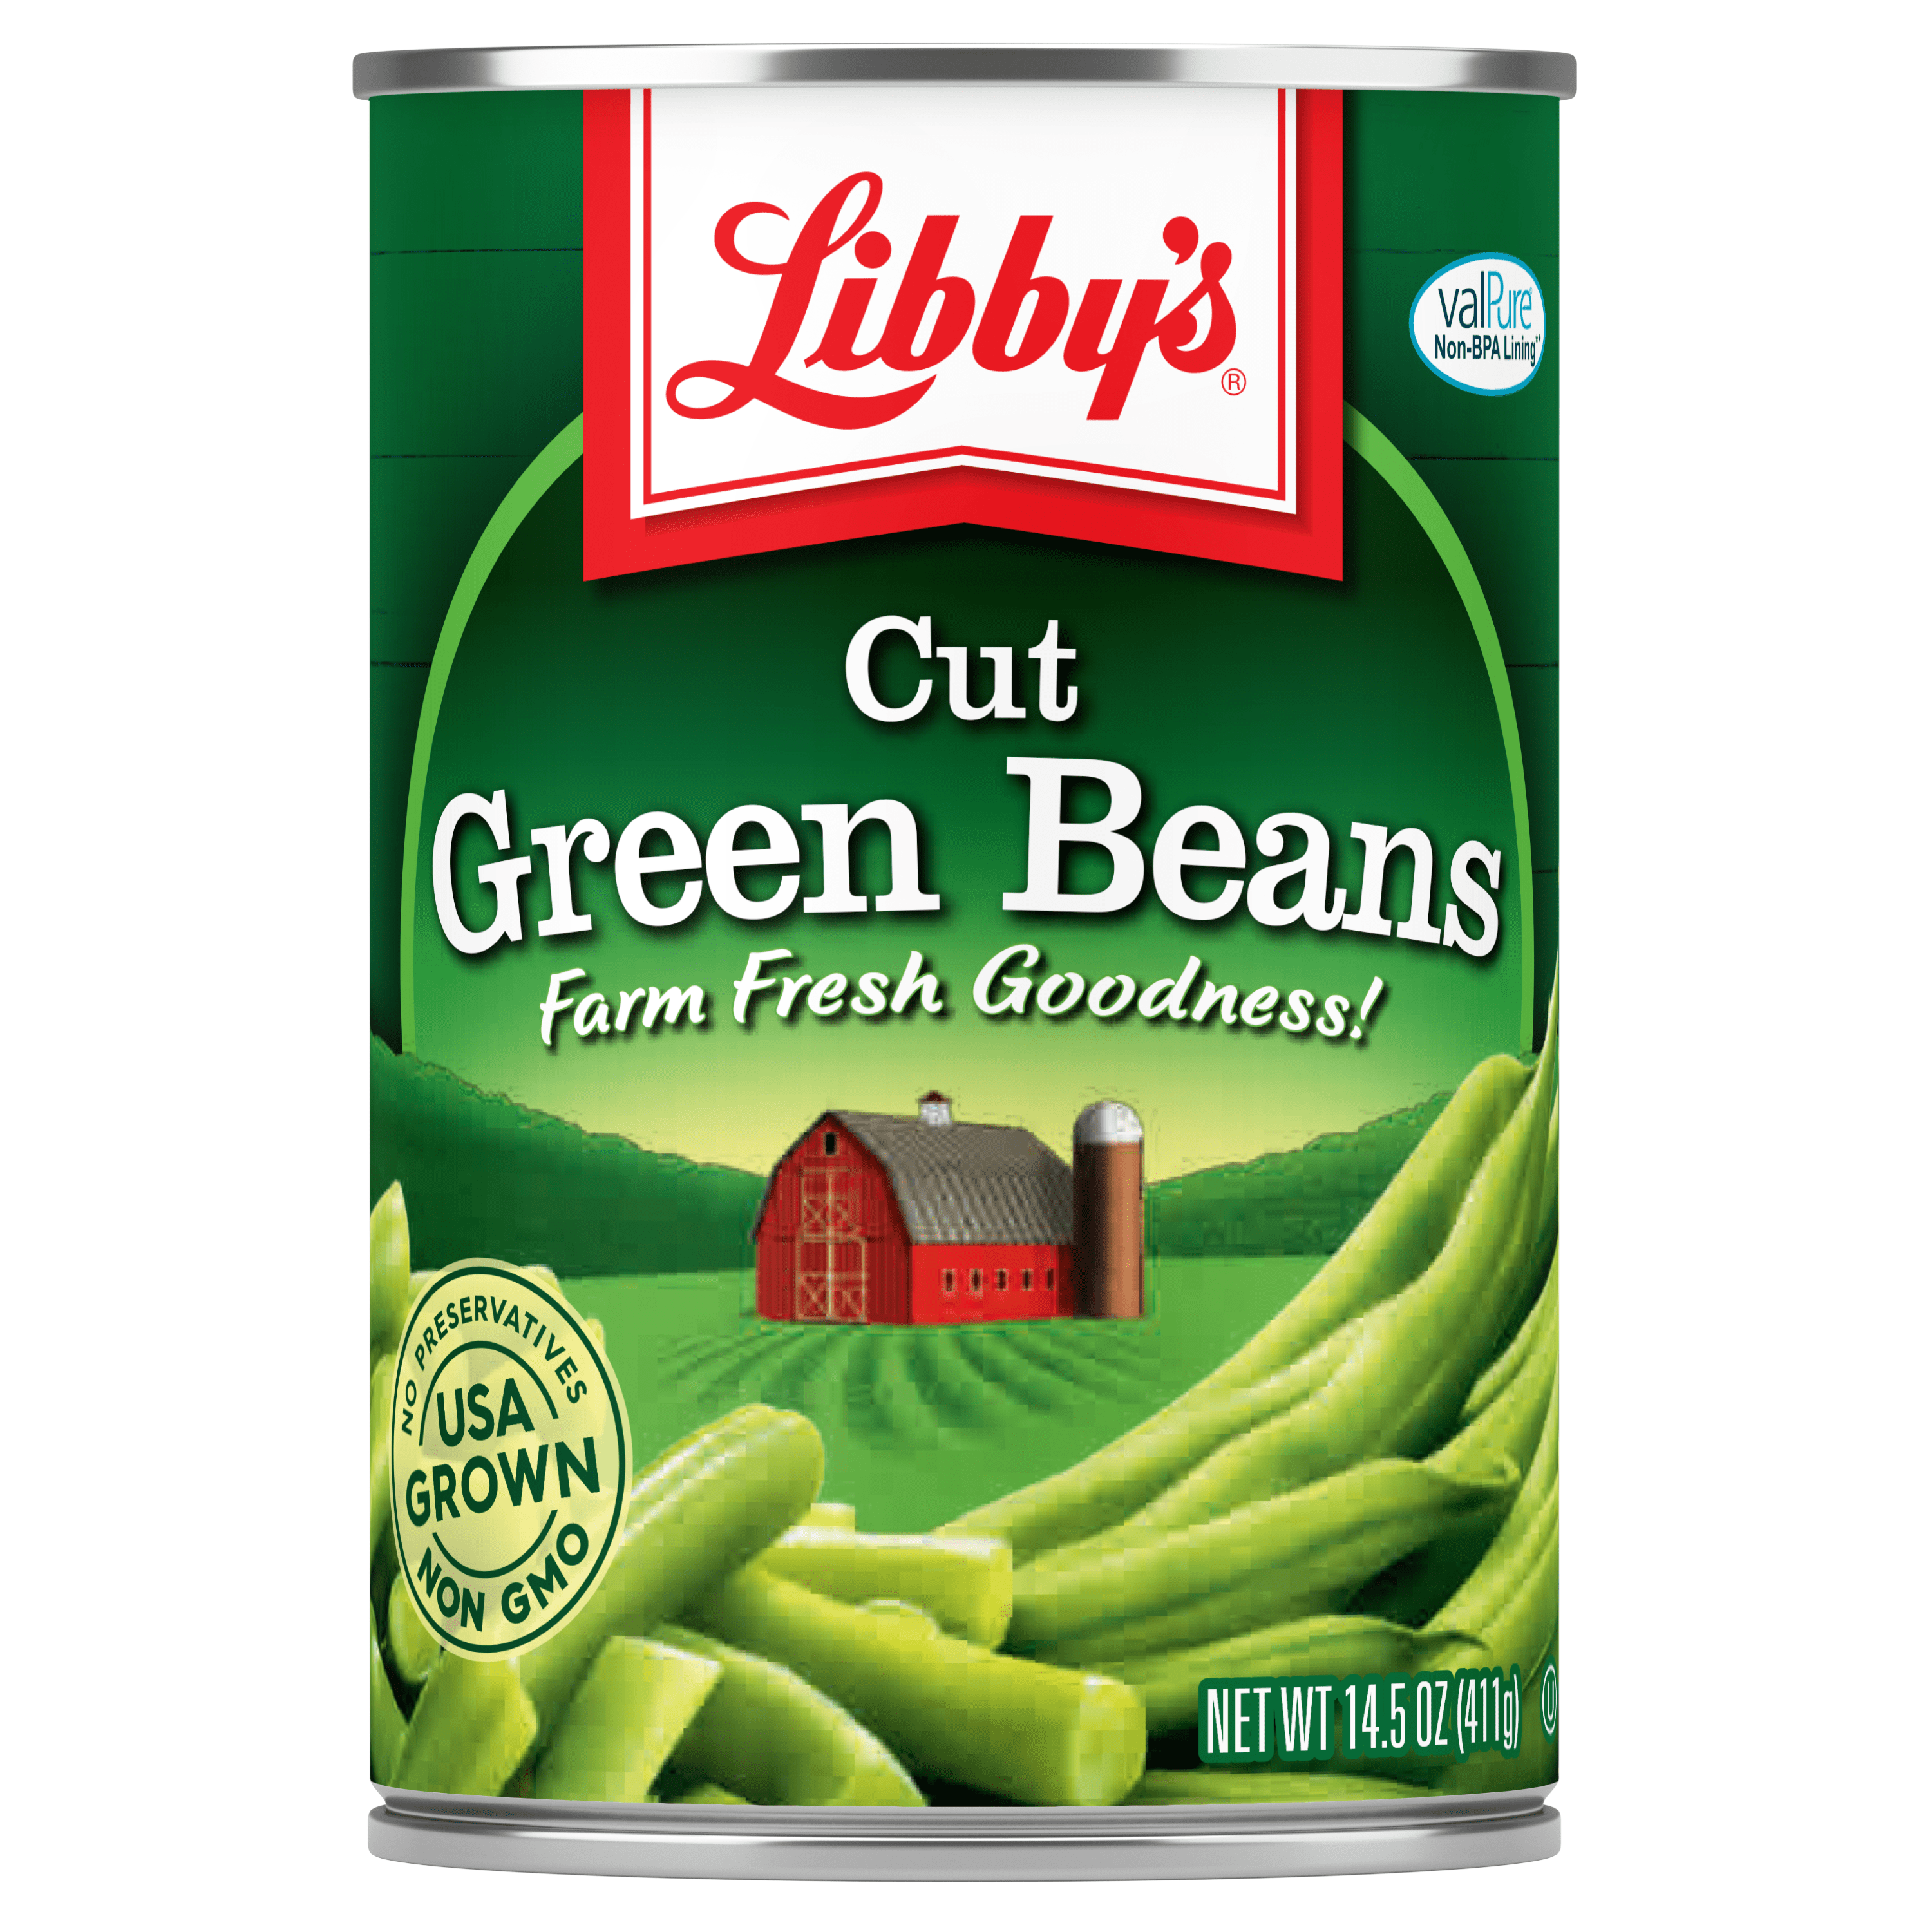 Libby's Cut Green Beans, Canned Green Beans, 14.5 oz. Can